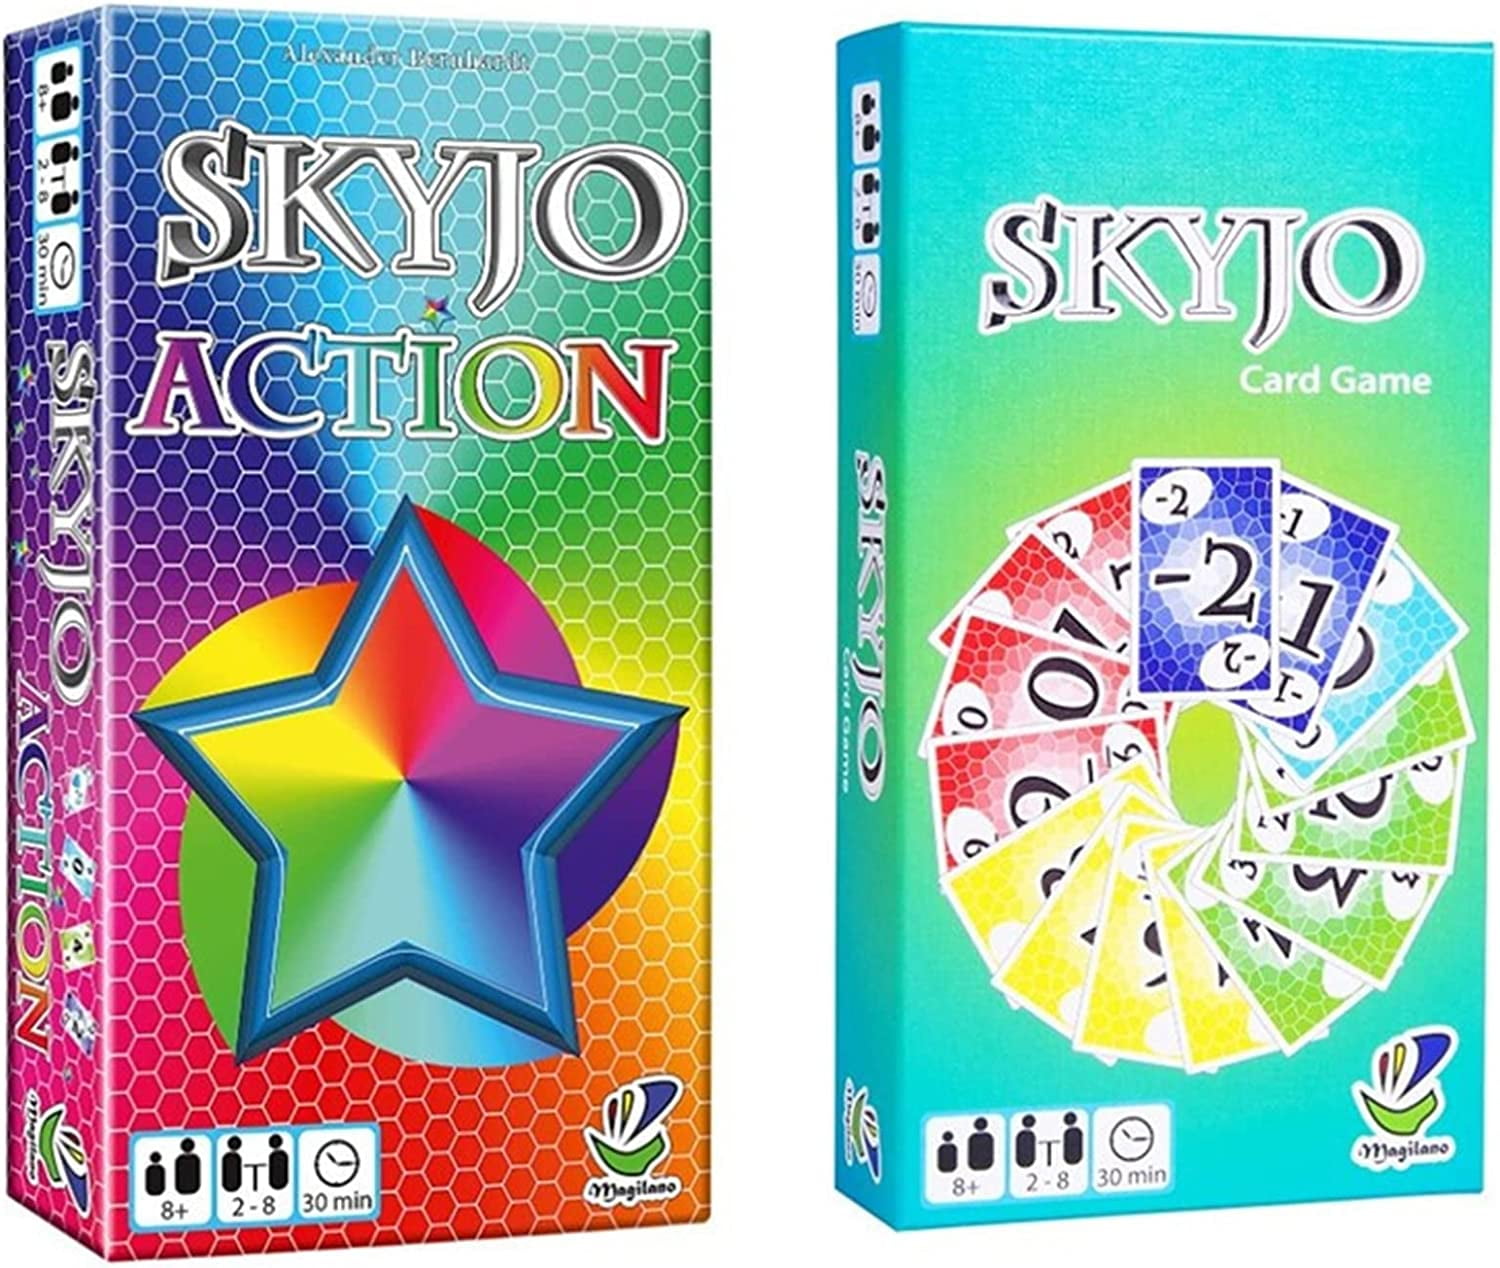 MKING Card Game for SKYJO-The Entertaining Card Game for Kids and